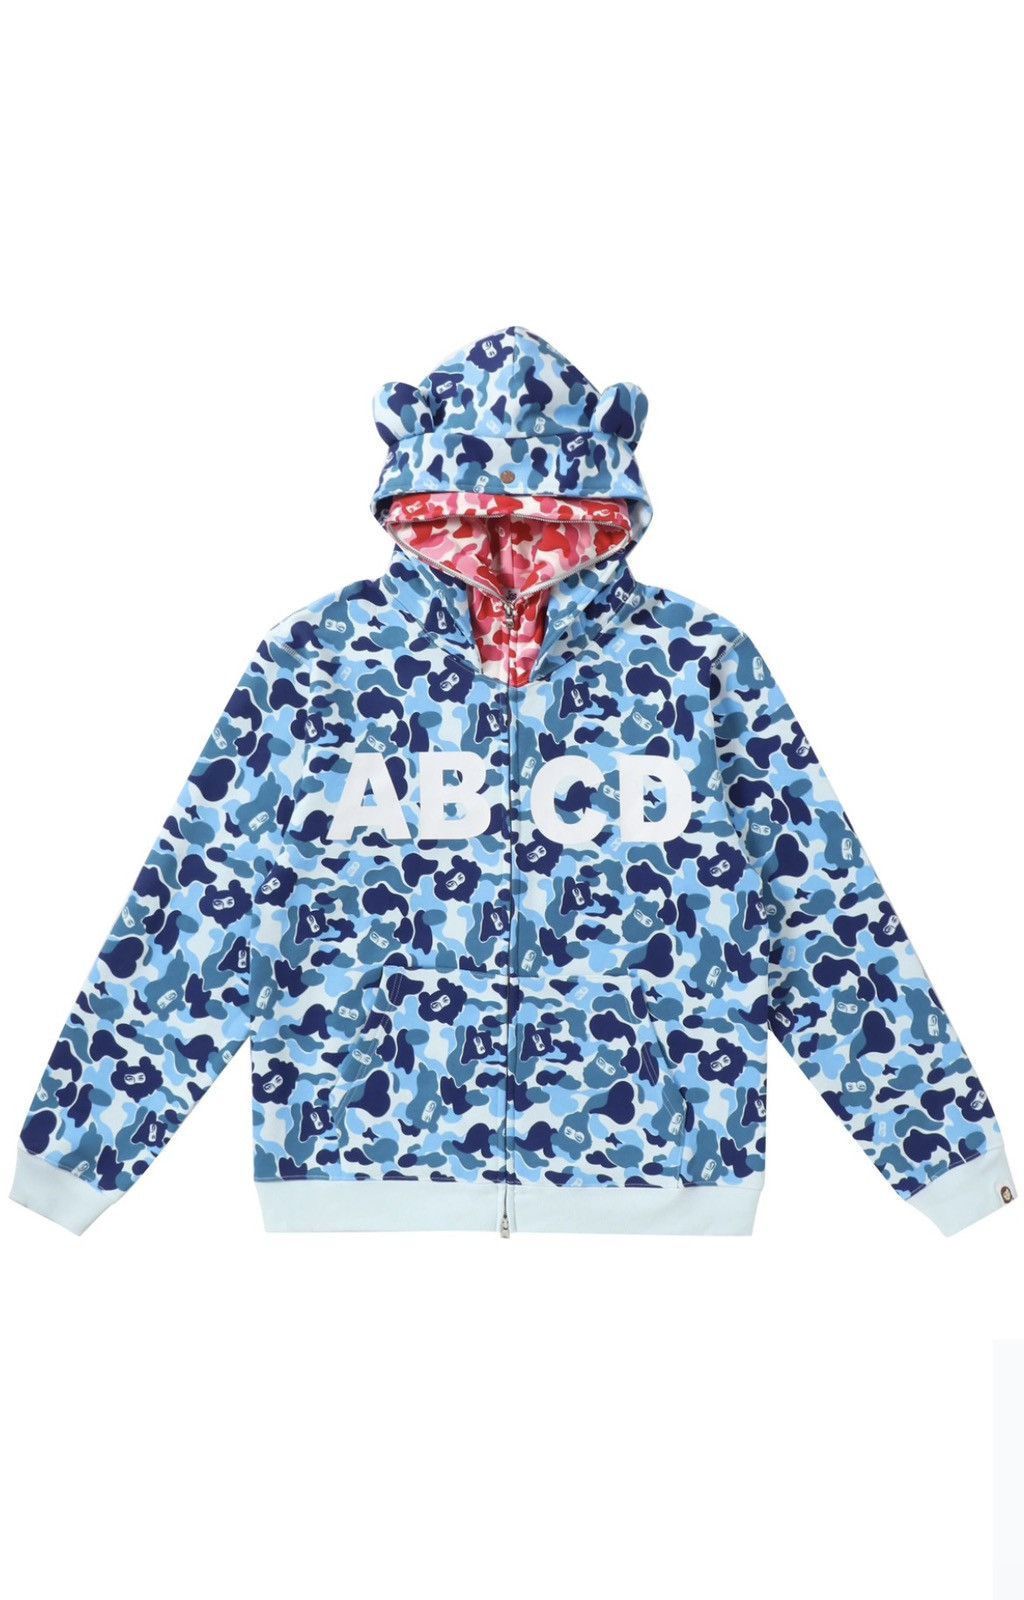 josewong abcd hoodie - パーカー